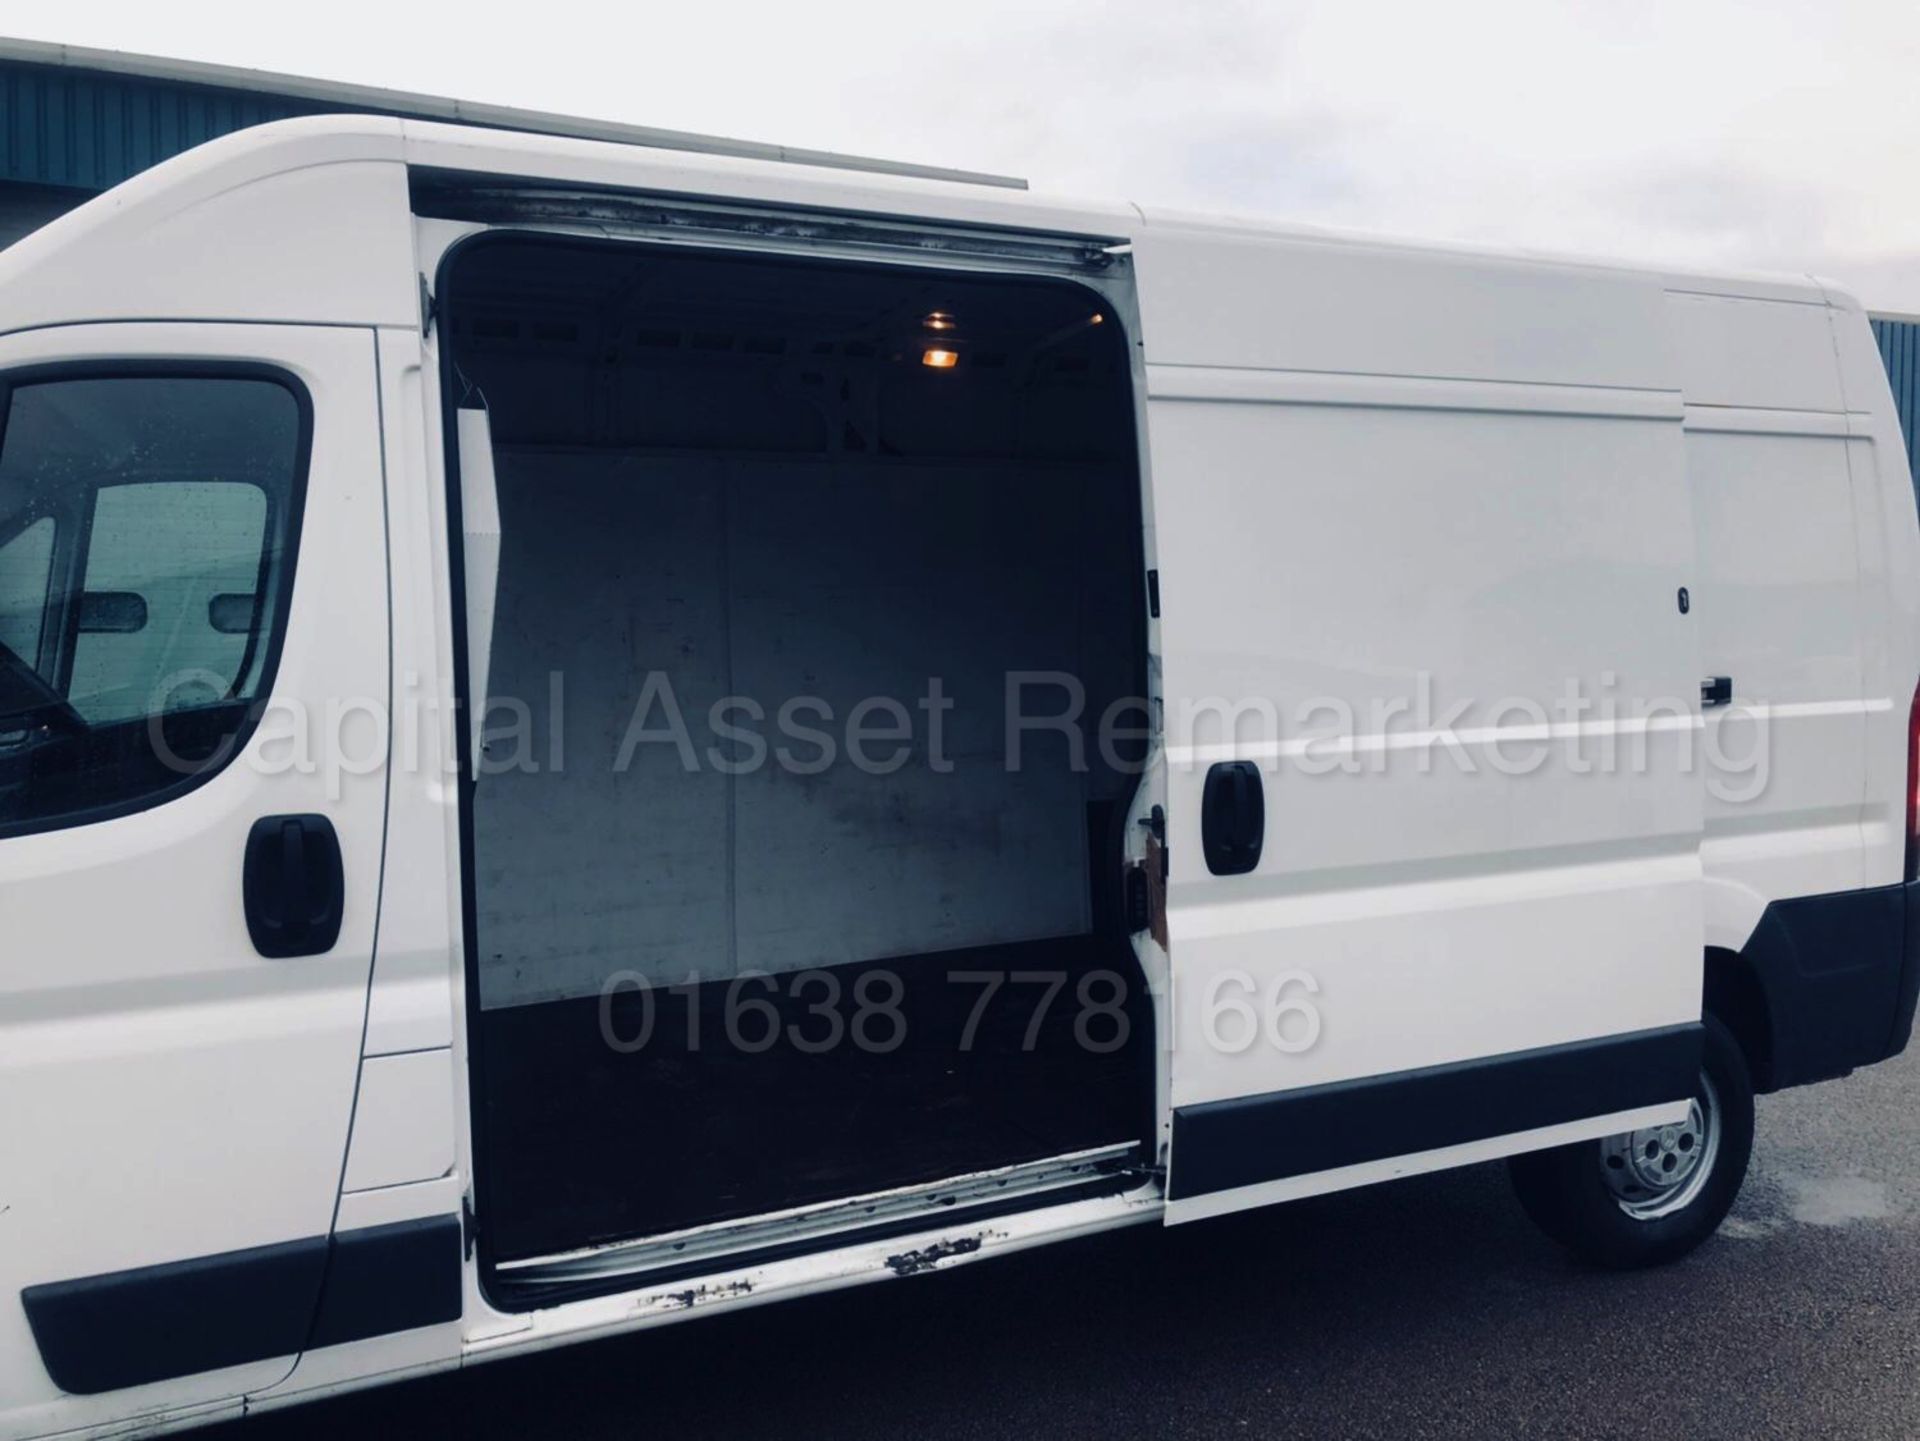 CITREON RELAY 35 'LWB HI-ROOF' (2012 - 12 REG) '2.2 HDI - 130 BHP - 6 SPEED' **ELECTRIC PACK** - Image 11 of 20